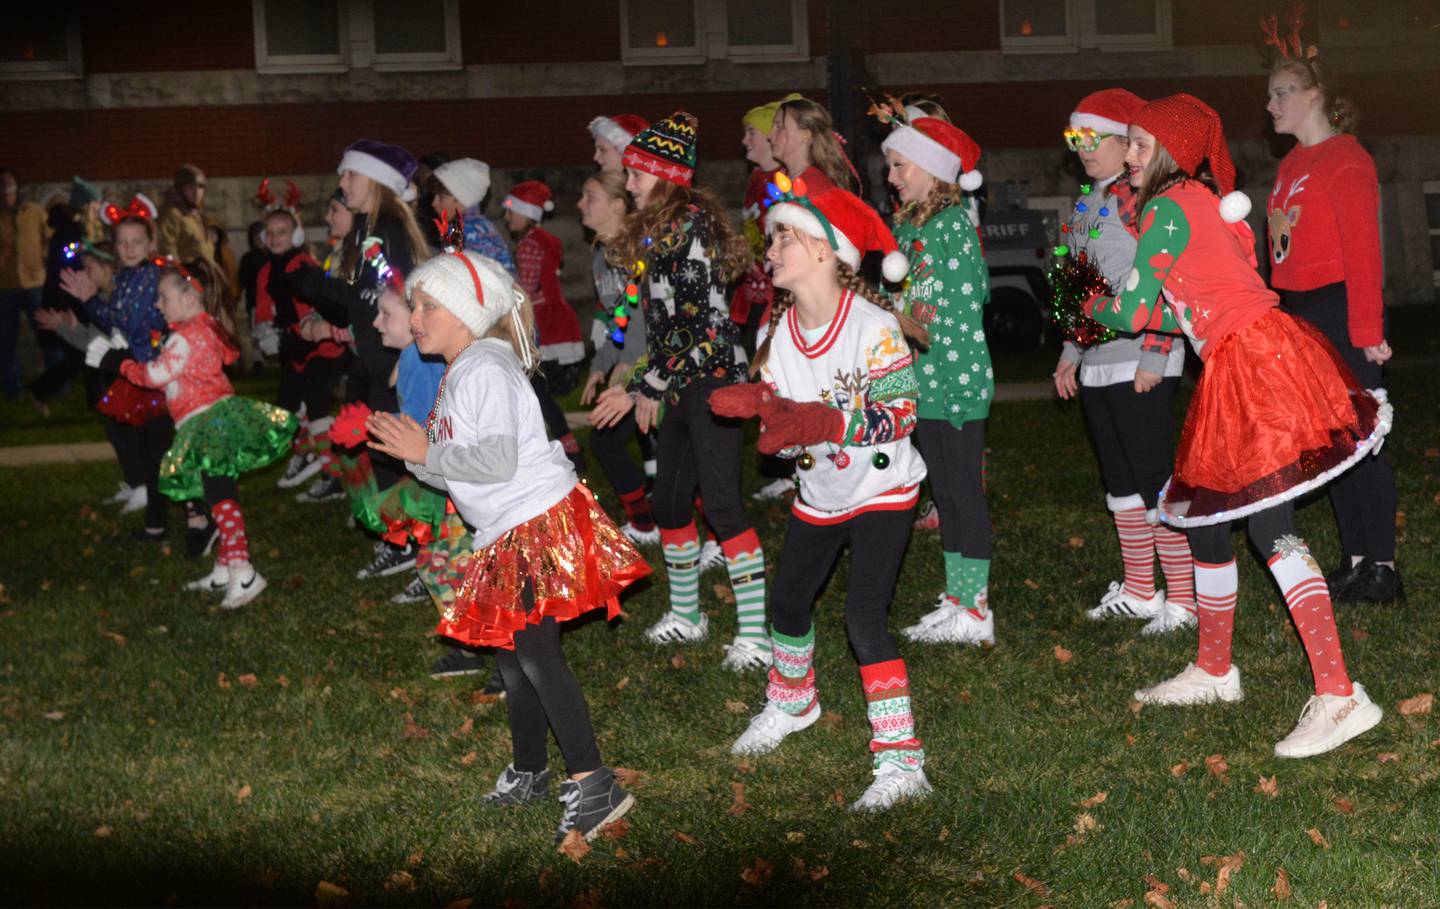 The Byron Dance Academy performed on the Ogle County Courthouse lawn during the tree lighting ceremony at Oregon's Candlelight Walk on Saturday, Nov. 25, 2023.. The evening event included Christmas music, shopping specials, kids activities, horsedrawn wagon rides and visits with Santa.